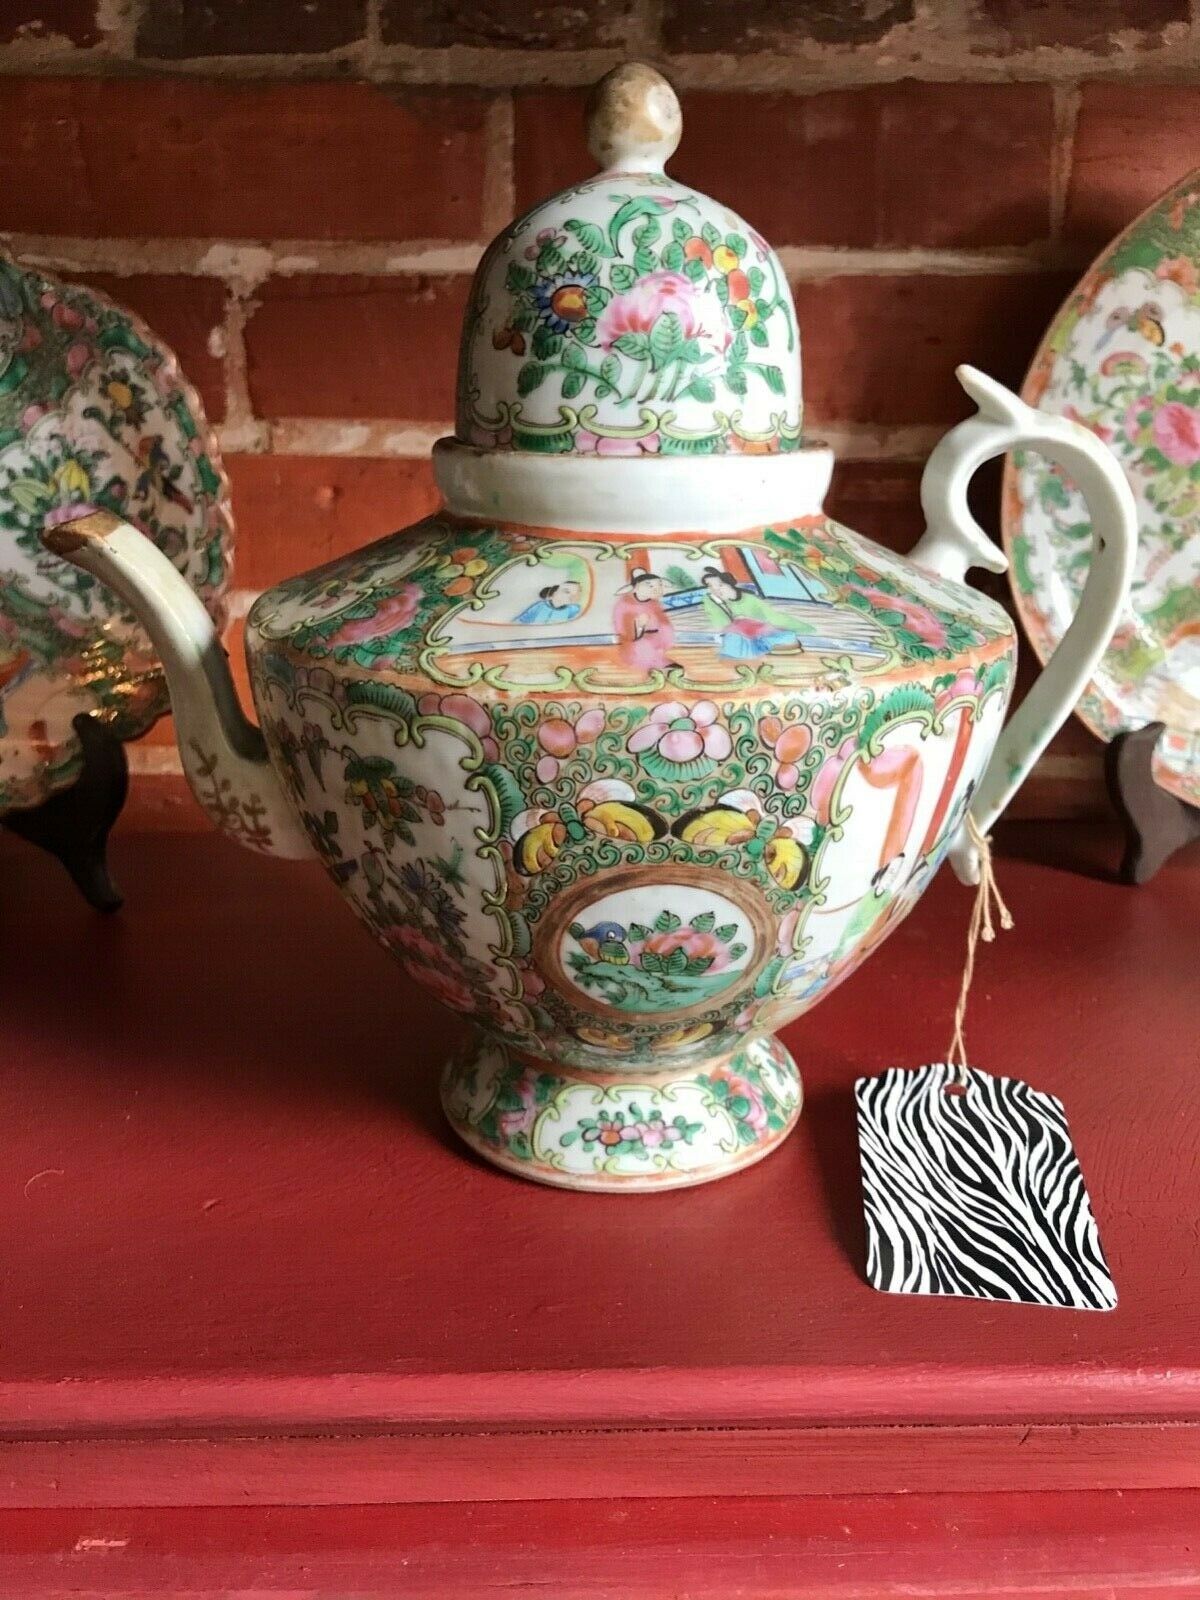 Antique Chinese Porcelain Export Rose Medallion Dome Teapot 19th c.  9 1/2” tall